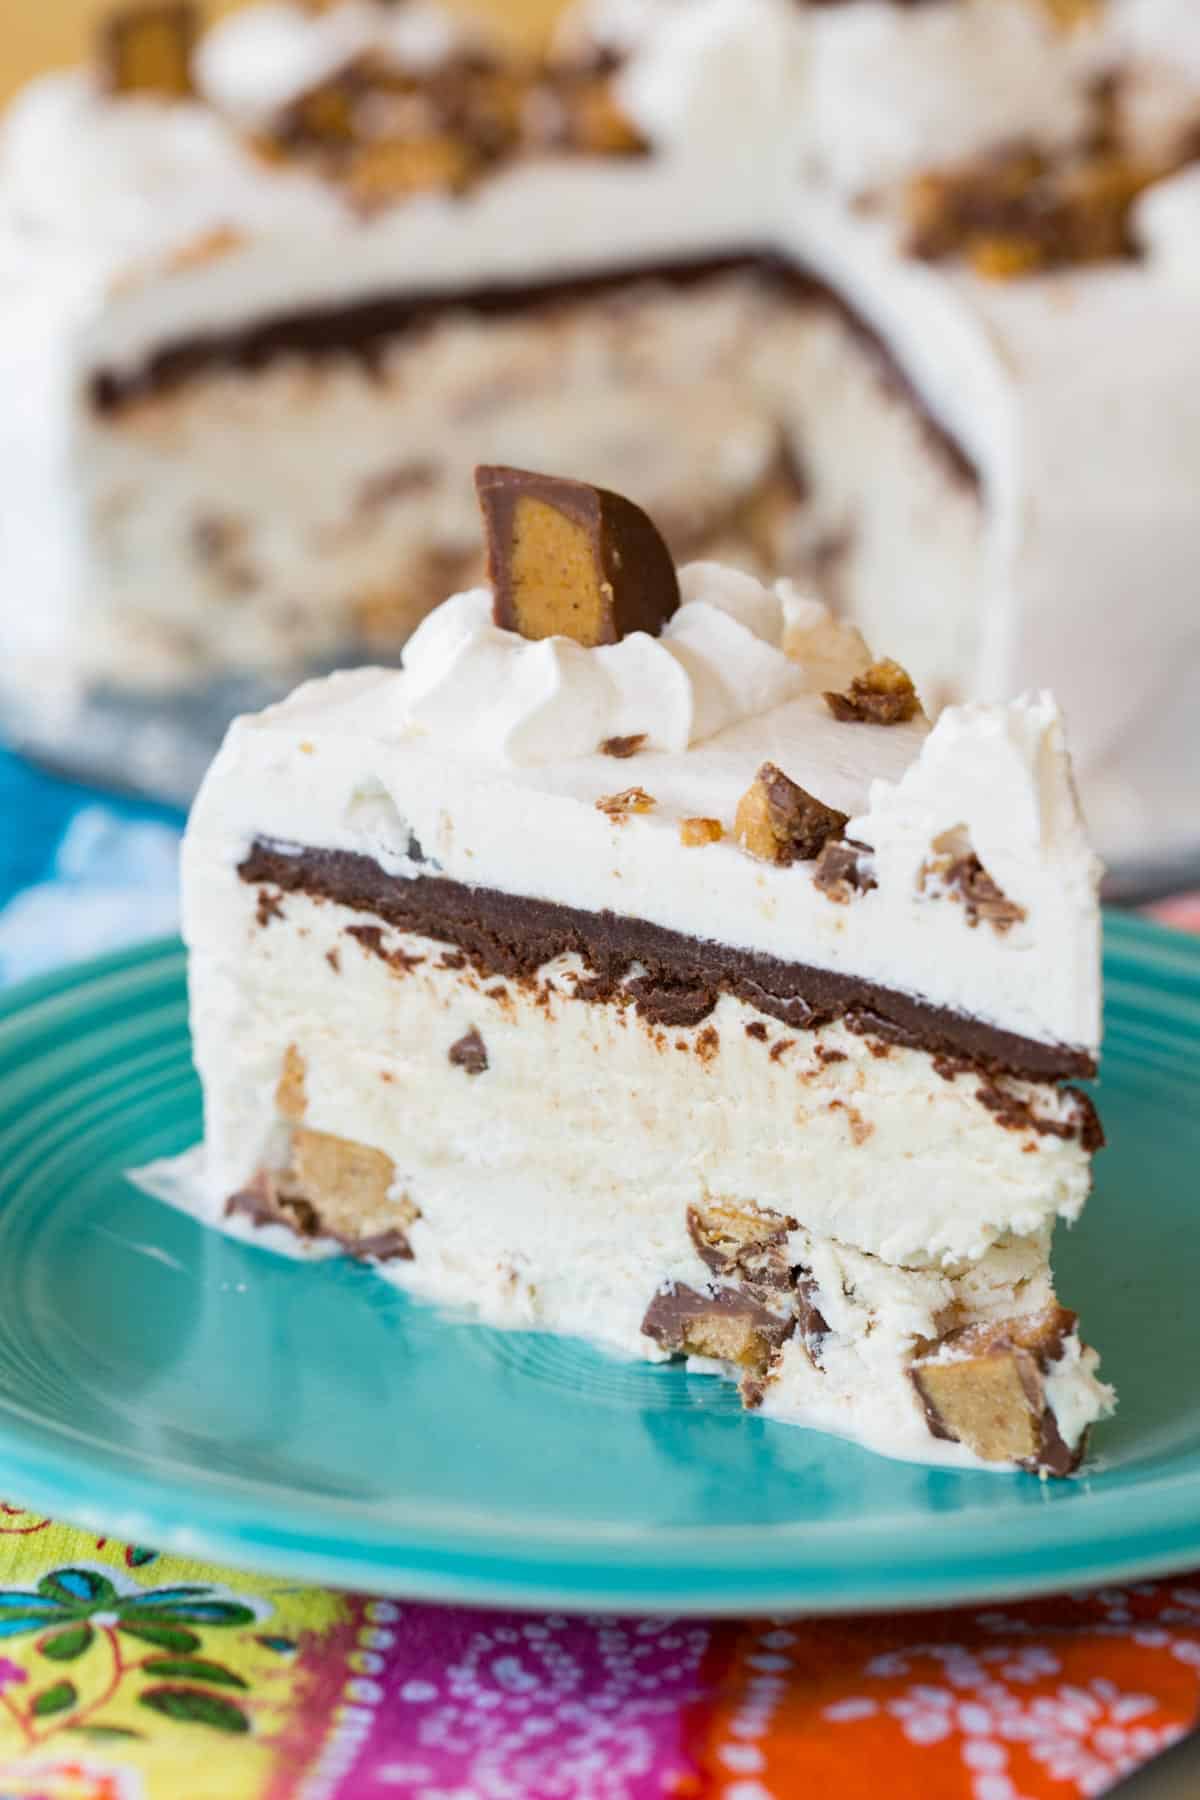 A slice of Reese's peanut butter ice cream cake on a plate with the rest of the cake behind it.